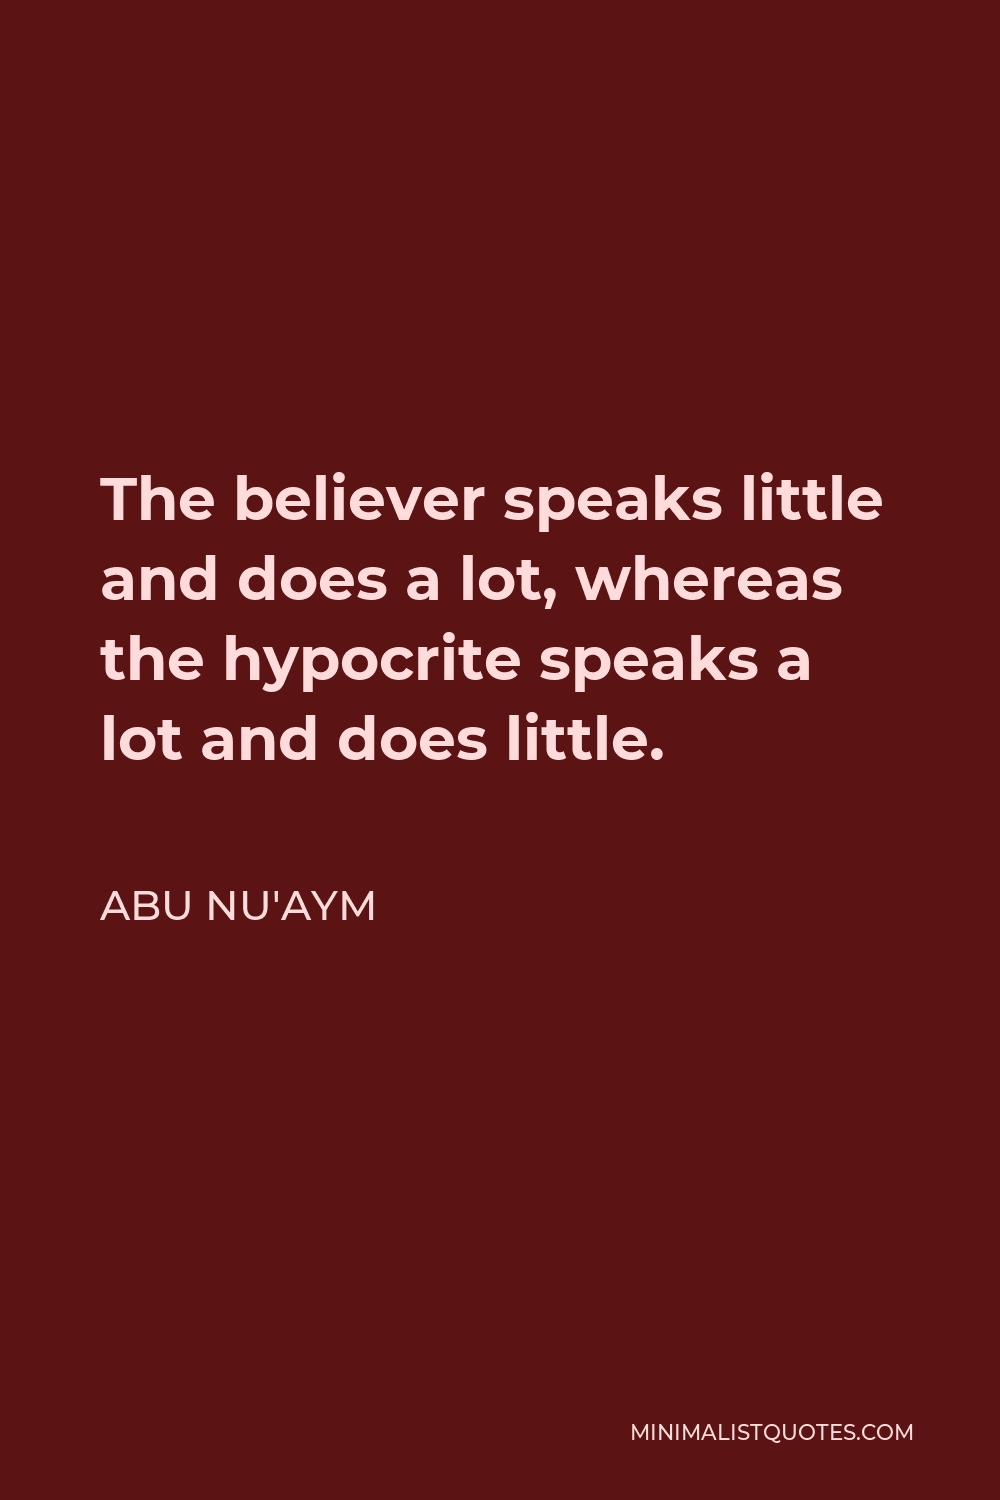 Abu Nu'aym Quote - The believer speaks little and does a lot, whereas the hypocrite speaks a lot and does little.